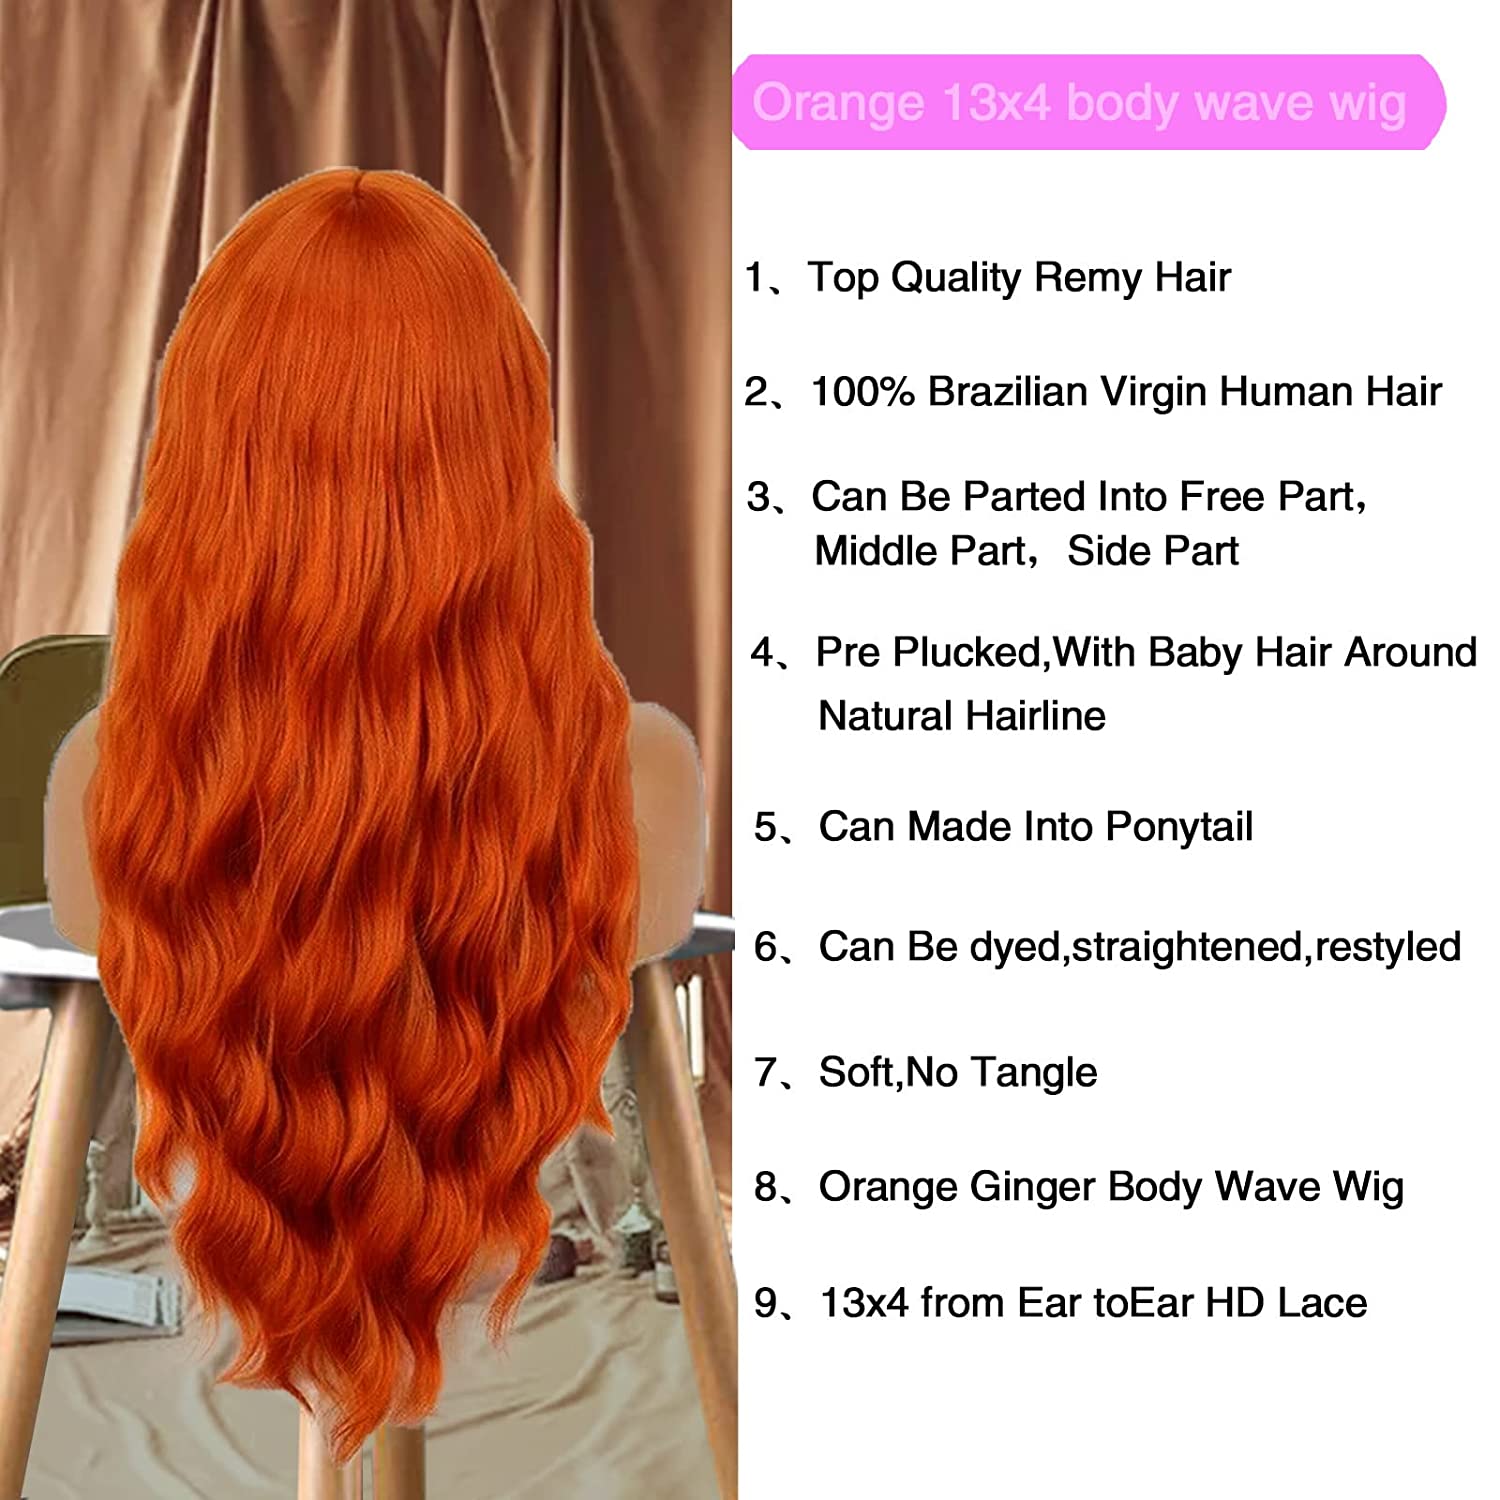 Blackbeauty hair Ginger Orange Body Wave 13x4 Lace Front Wig